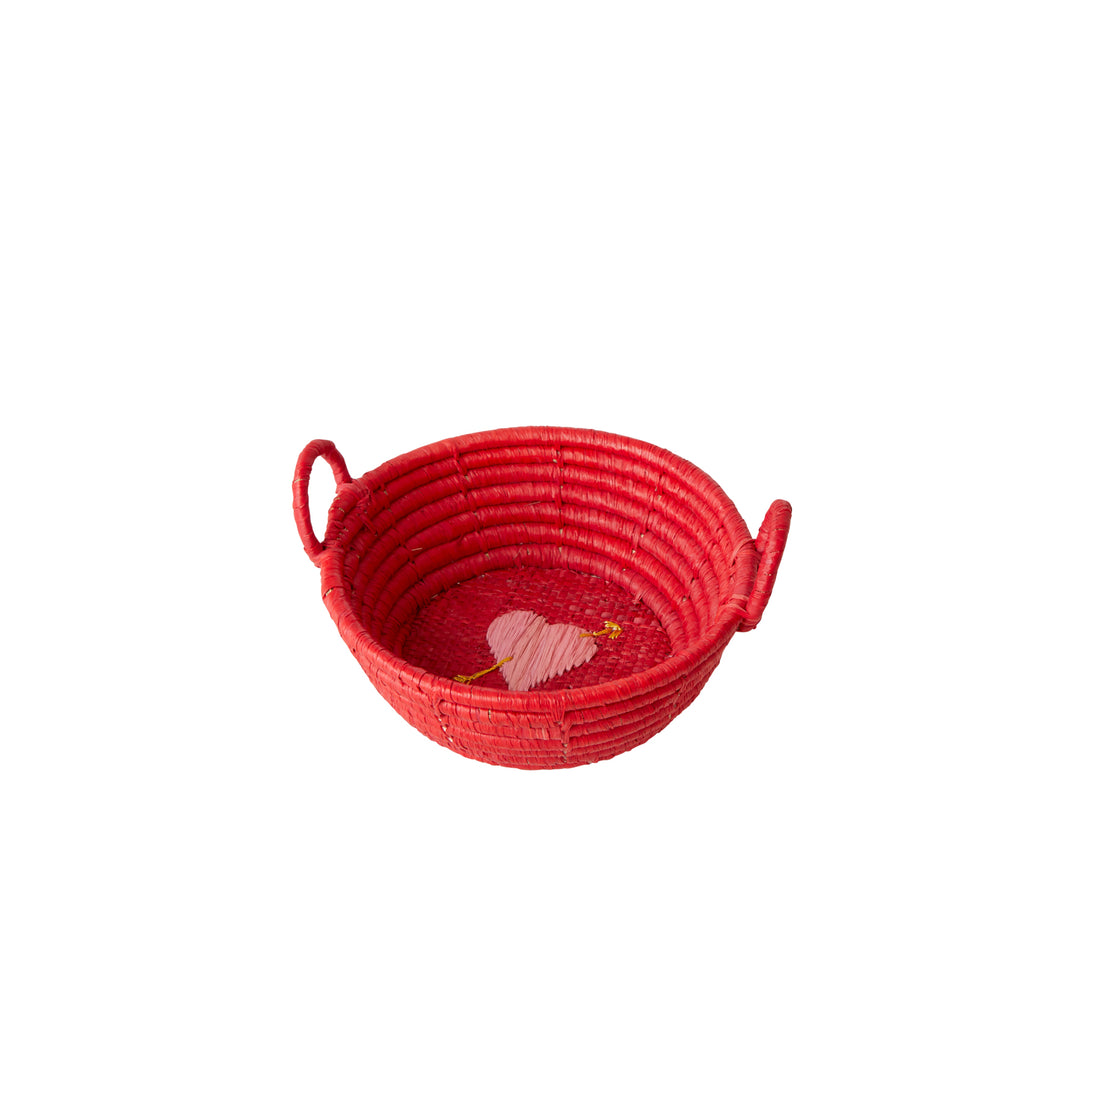 rice-dk-raffia-round-basket-with-hearts-red-mini-rice-bsbre-miheaxcr- (1)